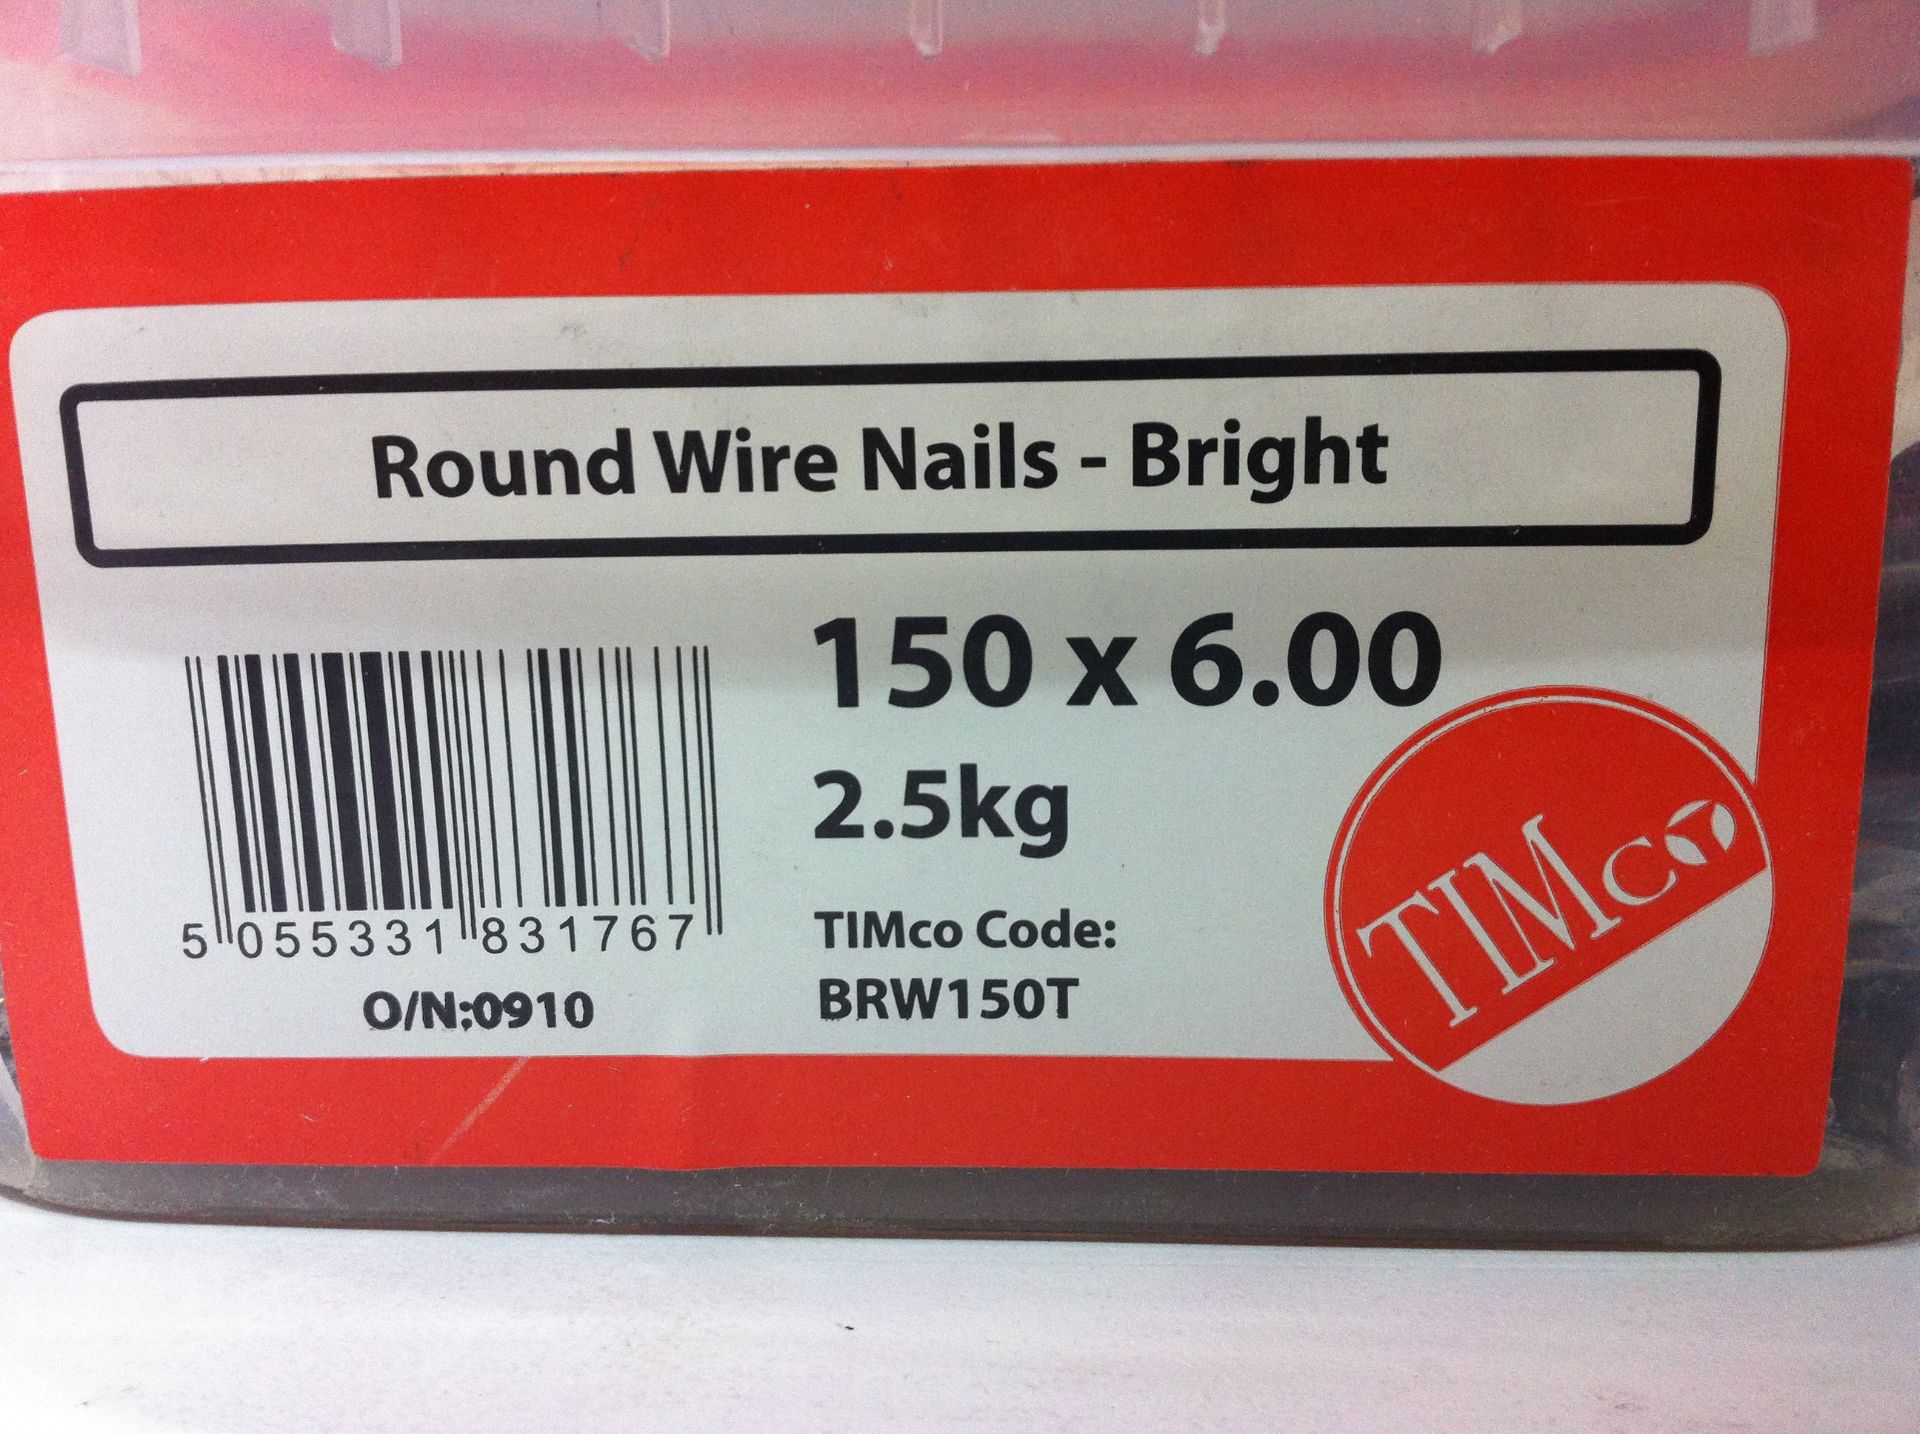 5 x 2.5kg Tubs of Timco Round Wire Nails - Size: 150 x 6.00 - Image 2 of 2